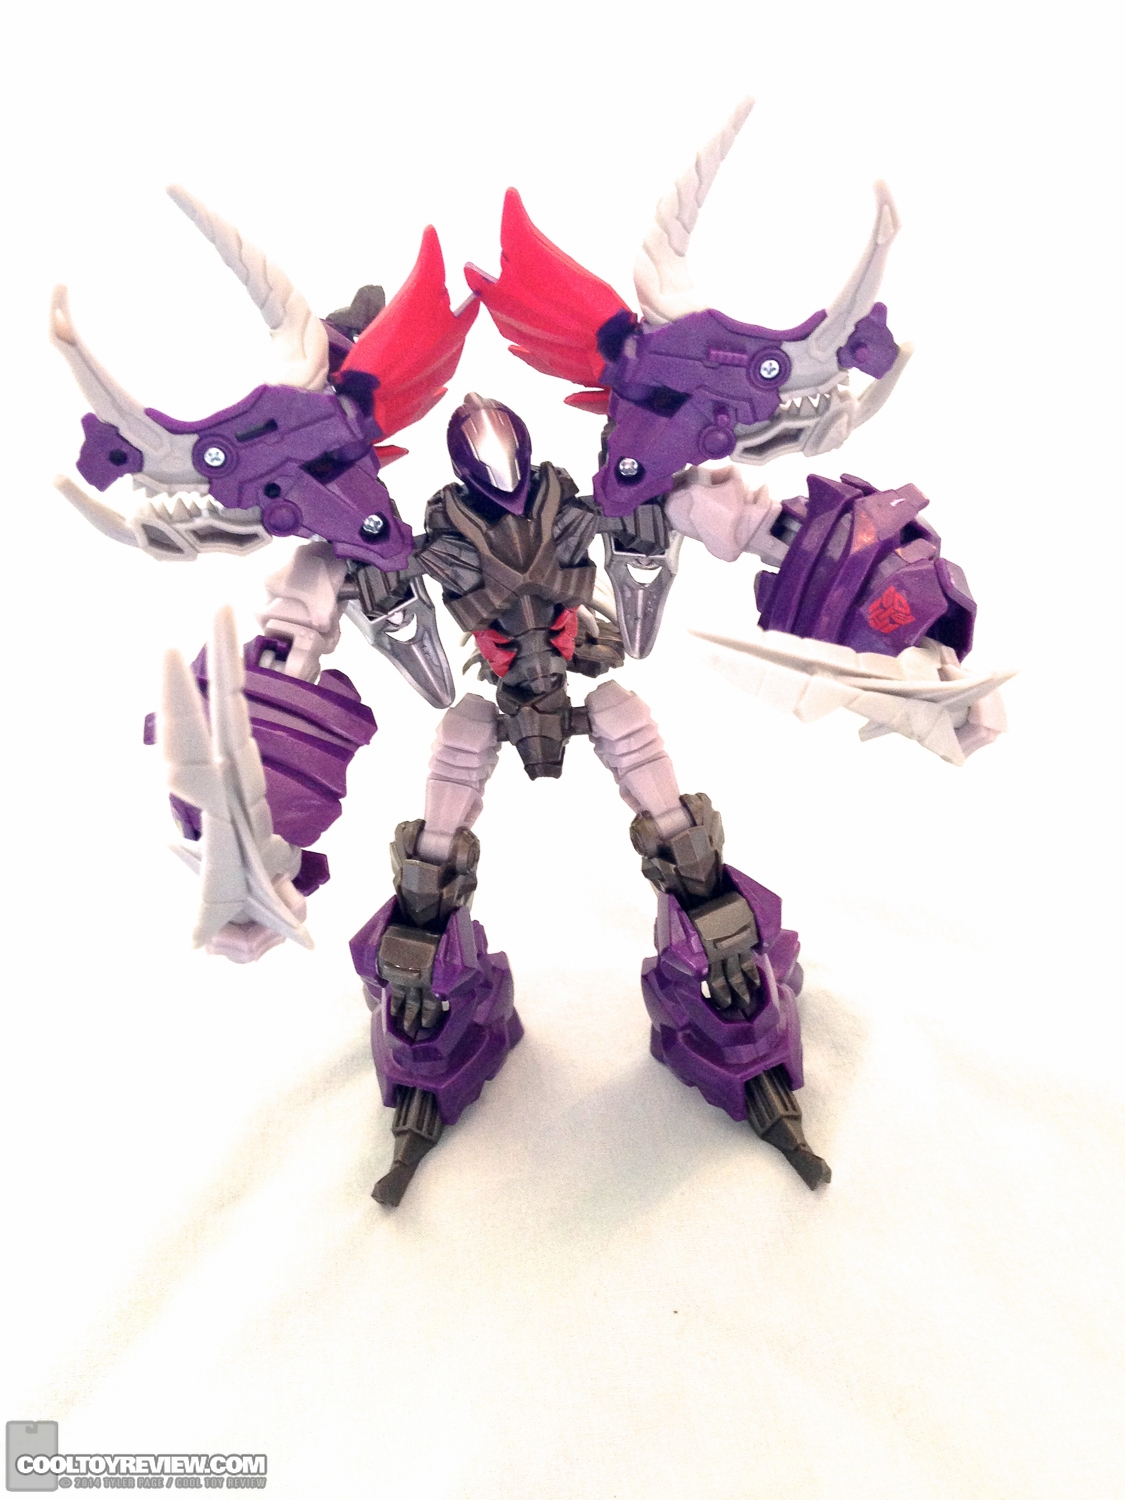 Transformers-Age-of-Extinction-Hasbro-Action-Figures-Review-013.jpg